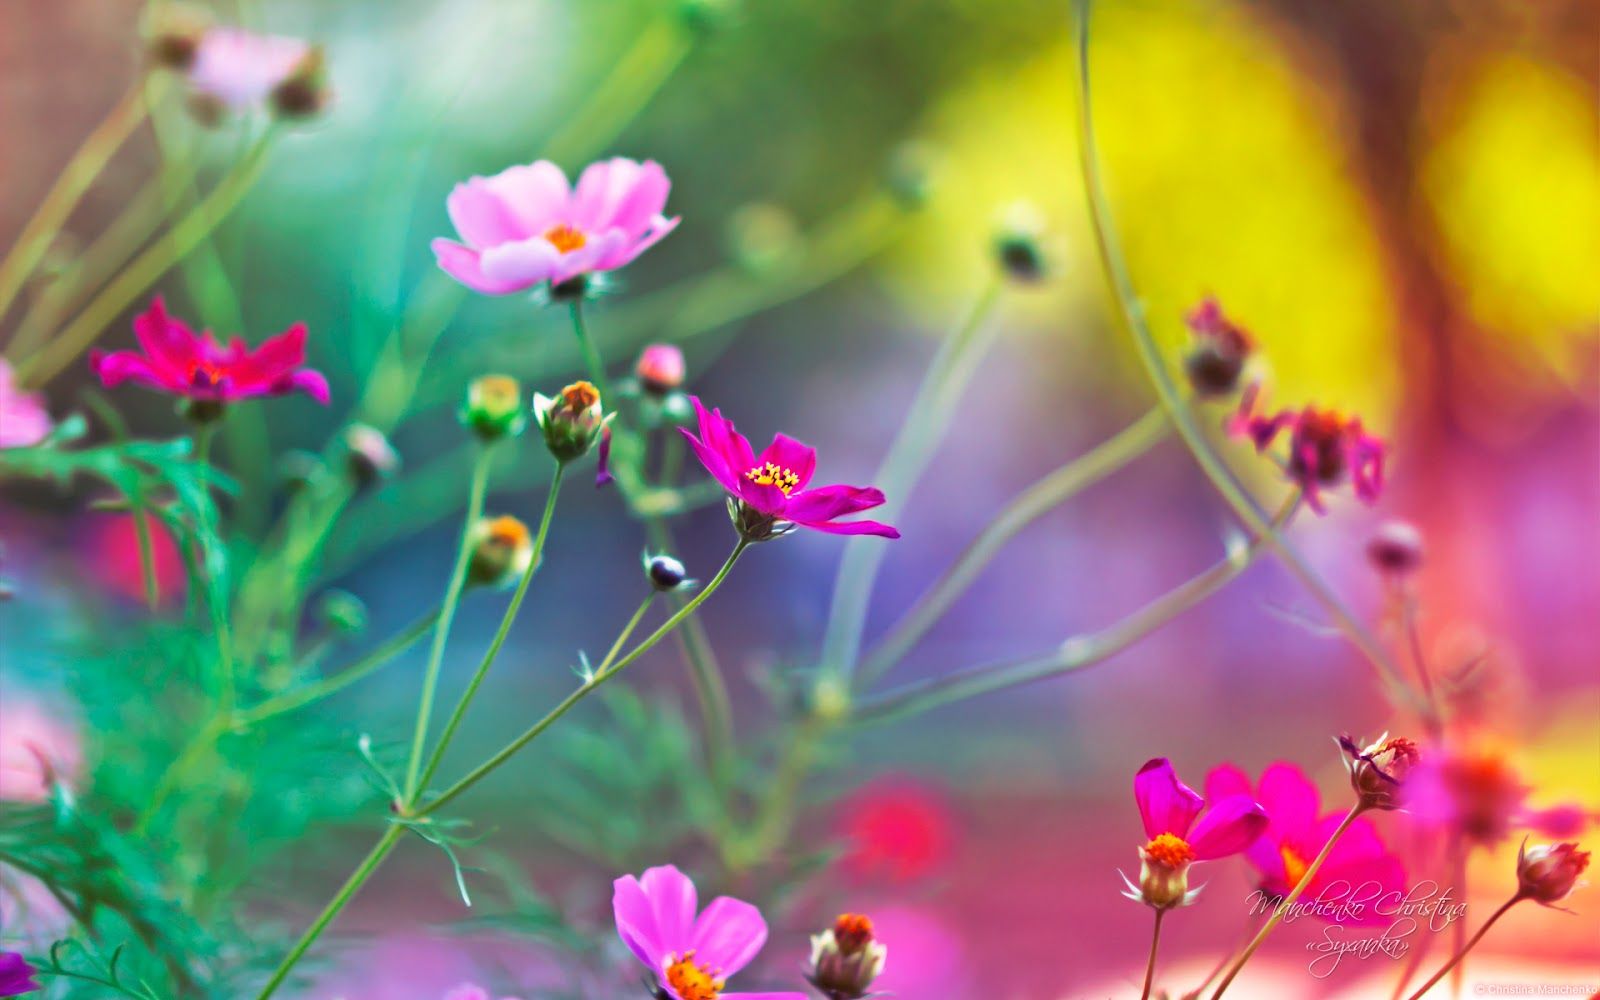 Amazing World Beautiful nature and flowers wallpaper download